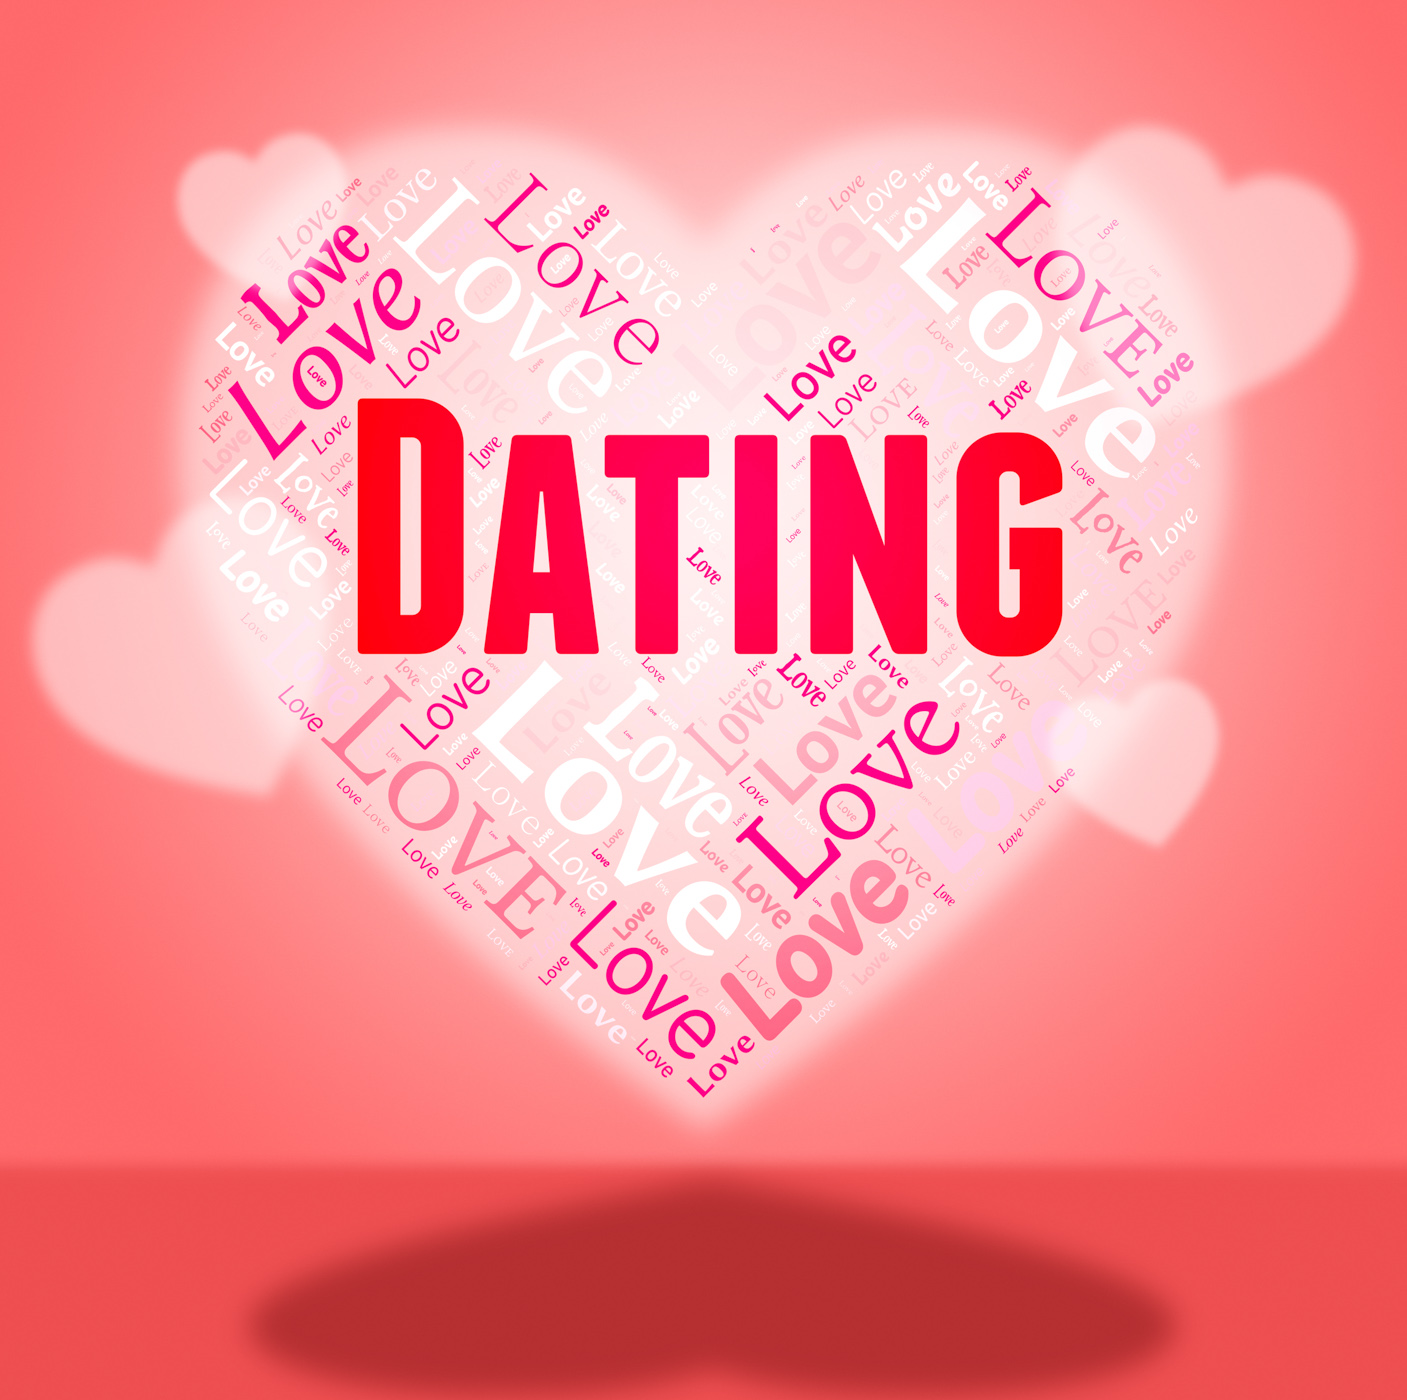 Dating heart shows sweetheart hearts and relationship photo